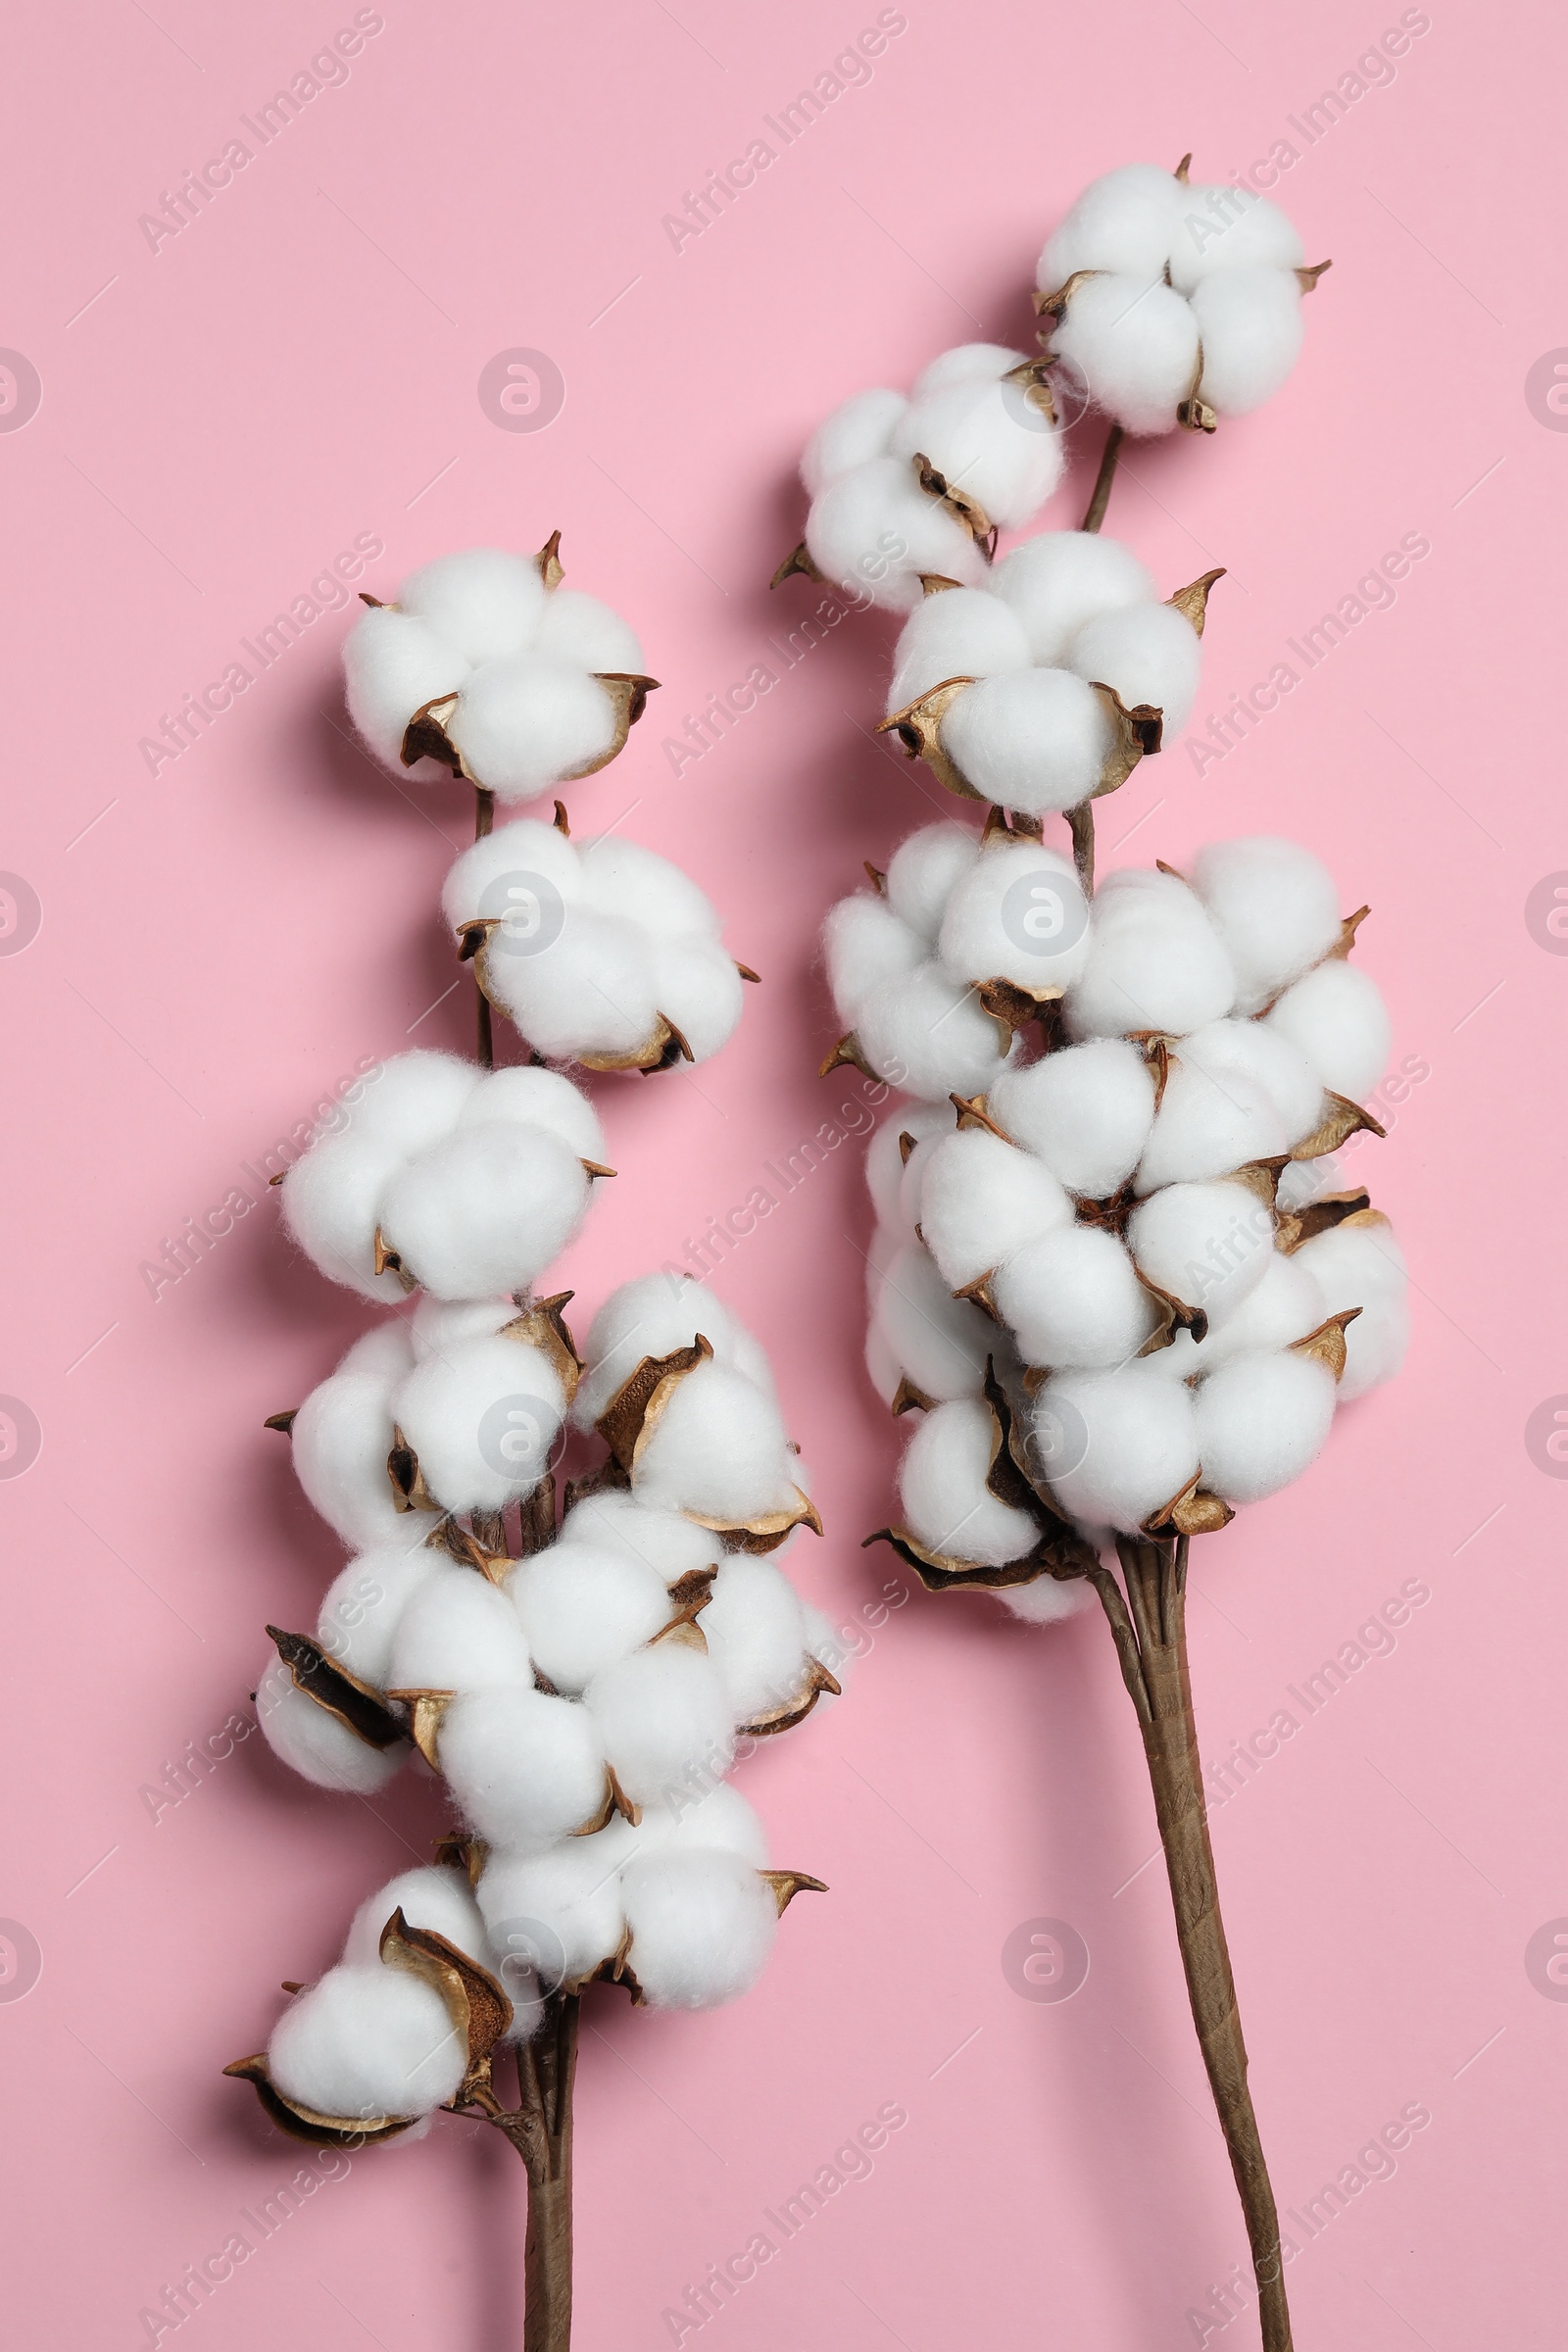 Photo of Branches with cotton flowers on pink background, top view